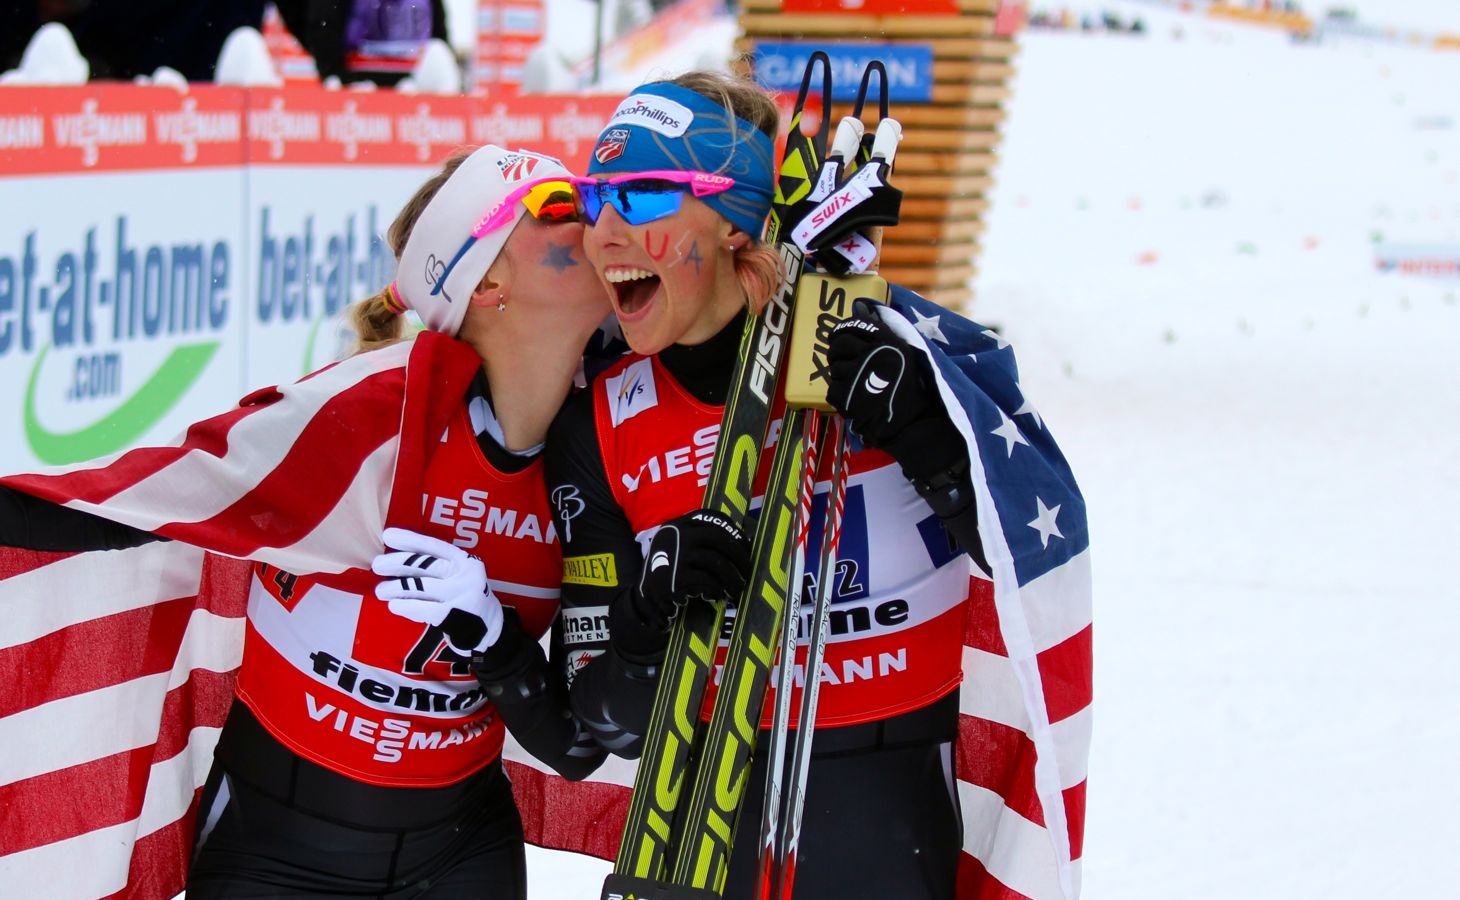 Chris Grover says that success by his athletes on the international stage - like U.S. teammates Jessie Diggins (l) and Kikkan Randall, here celebrate a gold medal in the freestyle team sprint at 2013 World Championships in Val di Fiemme, Italy - proves that cross country skiing is at a near level playing field. But he still wants answers about out-of-competition testing in other countries.